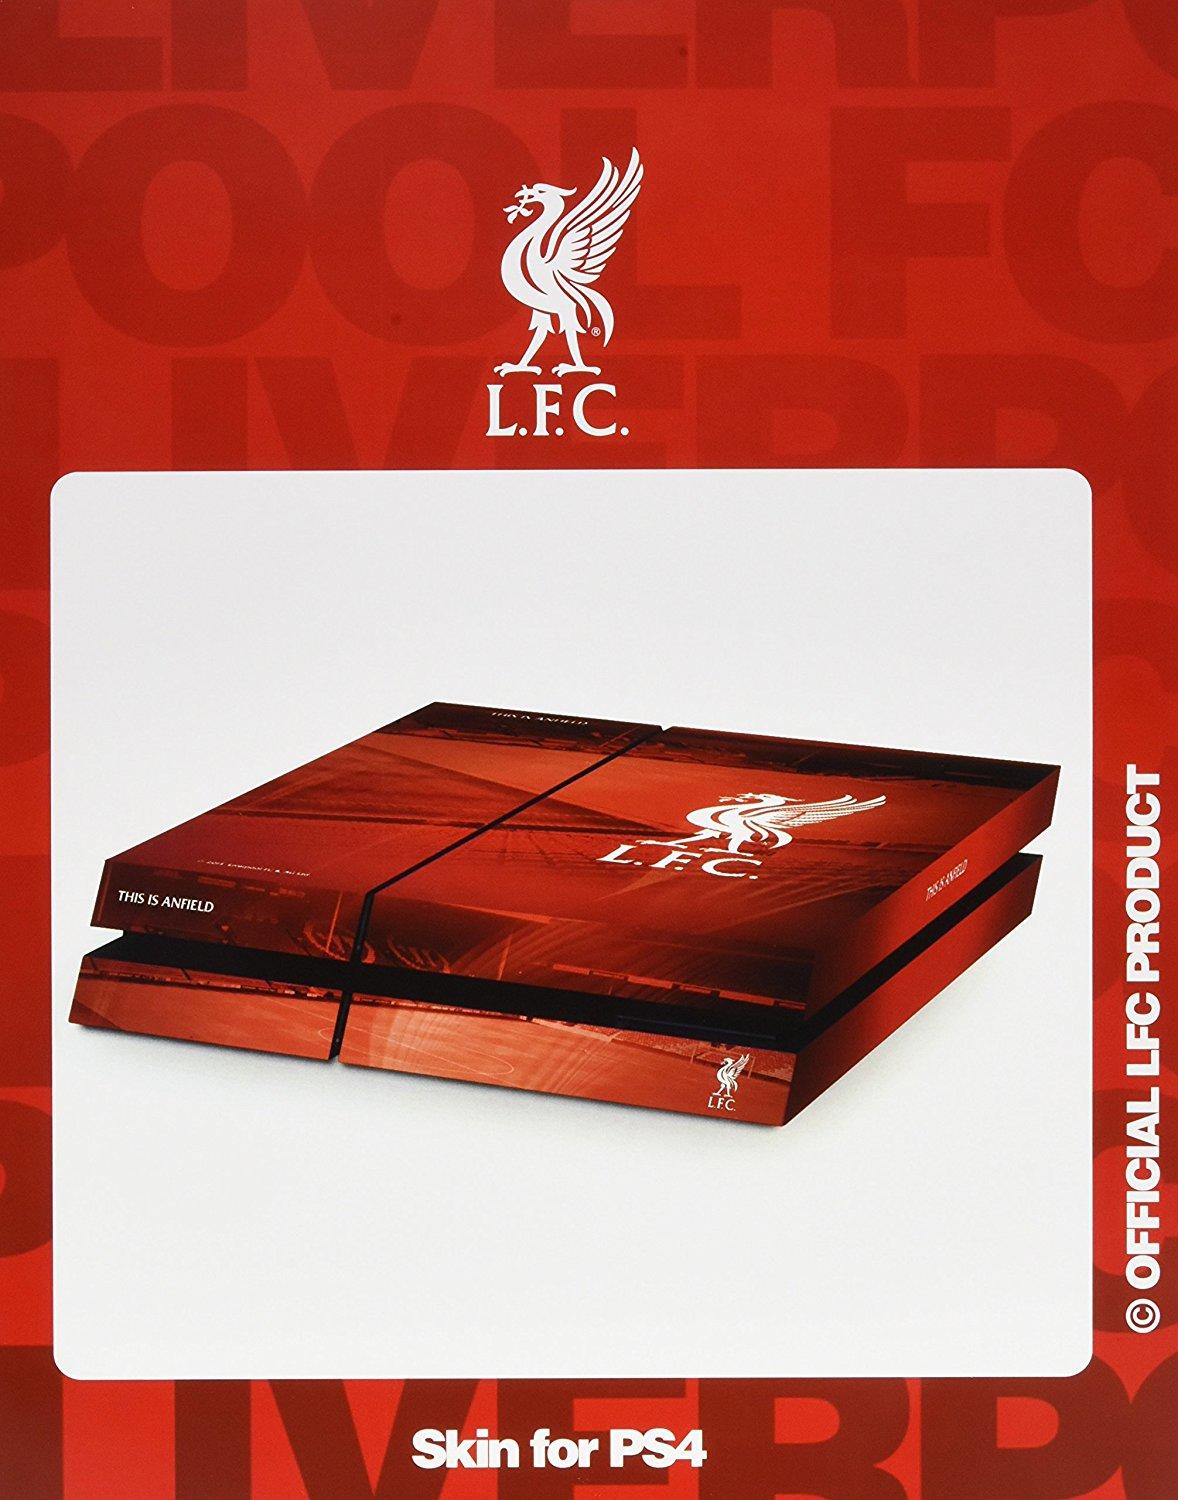 inToro Liverpool FC Skin for PlayStation 4 Console